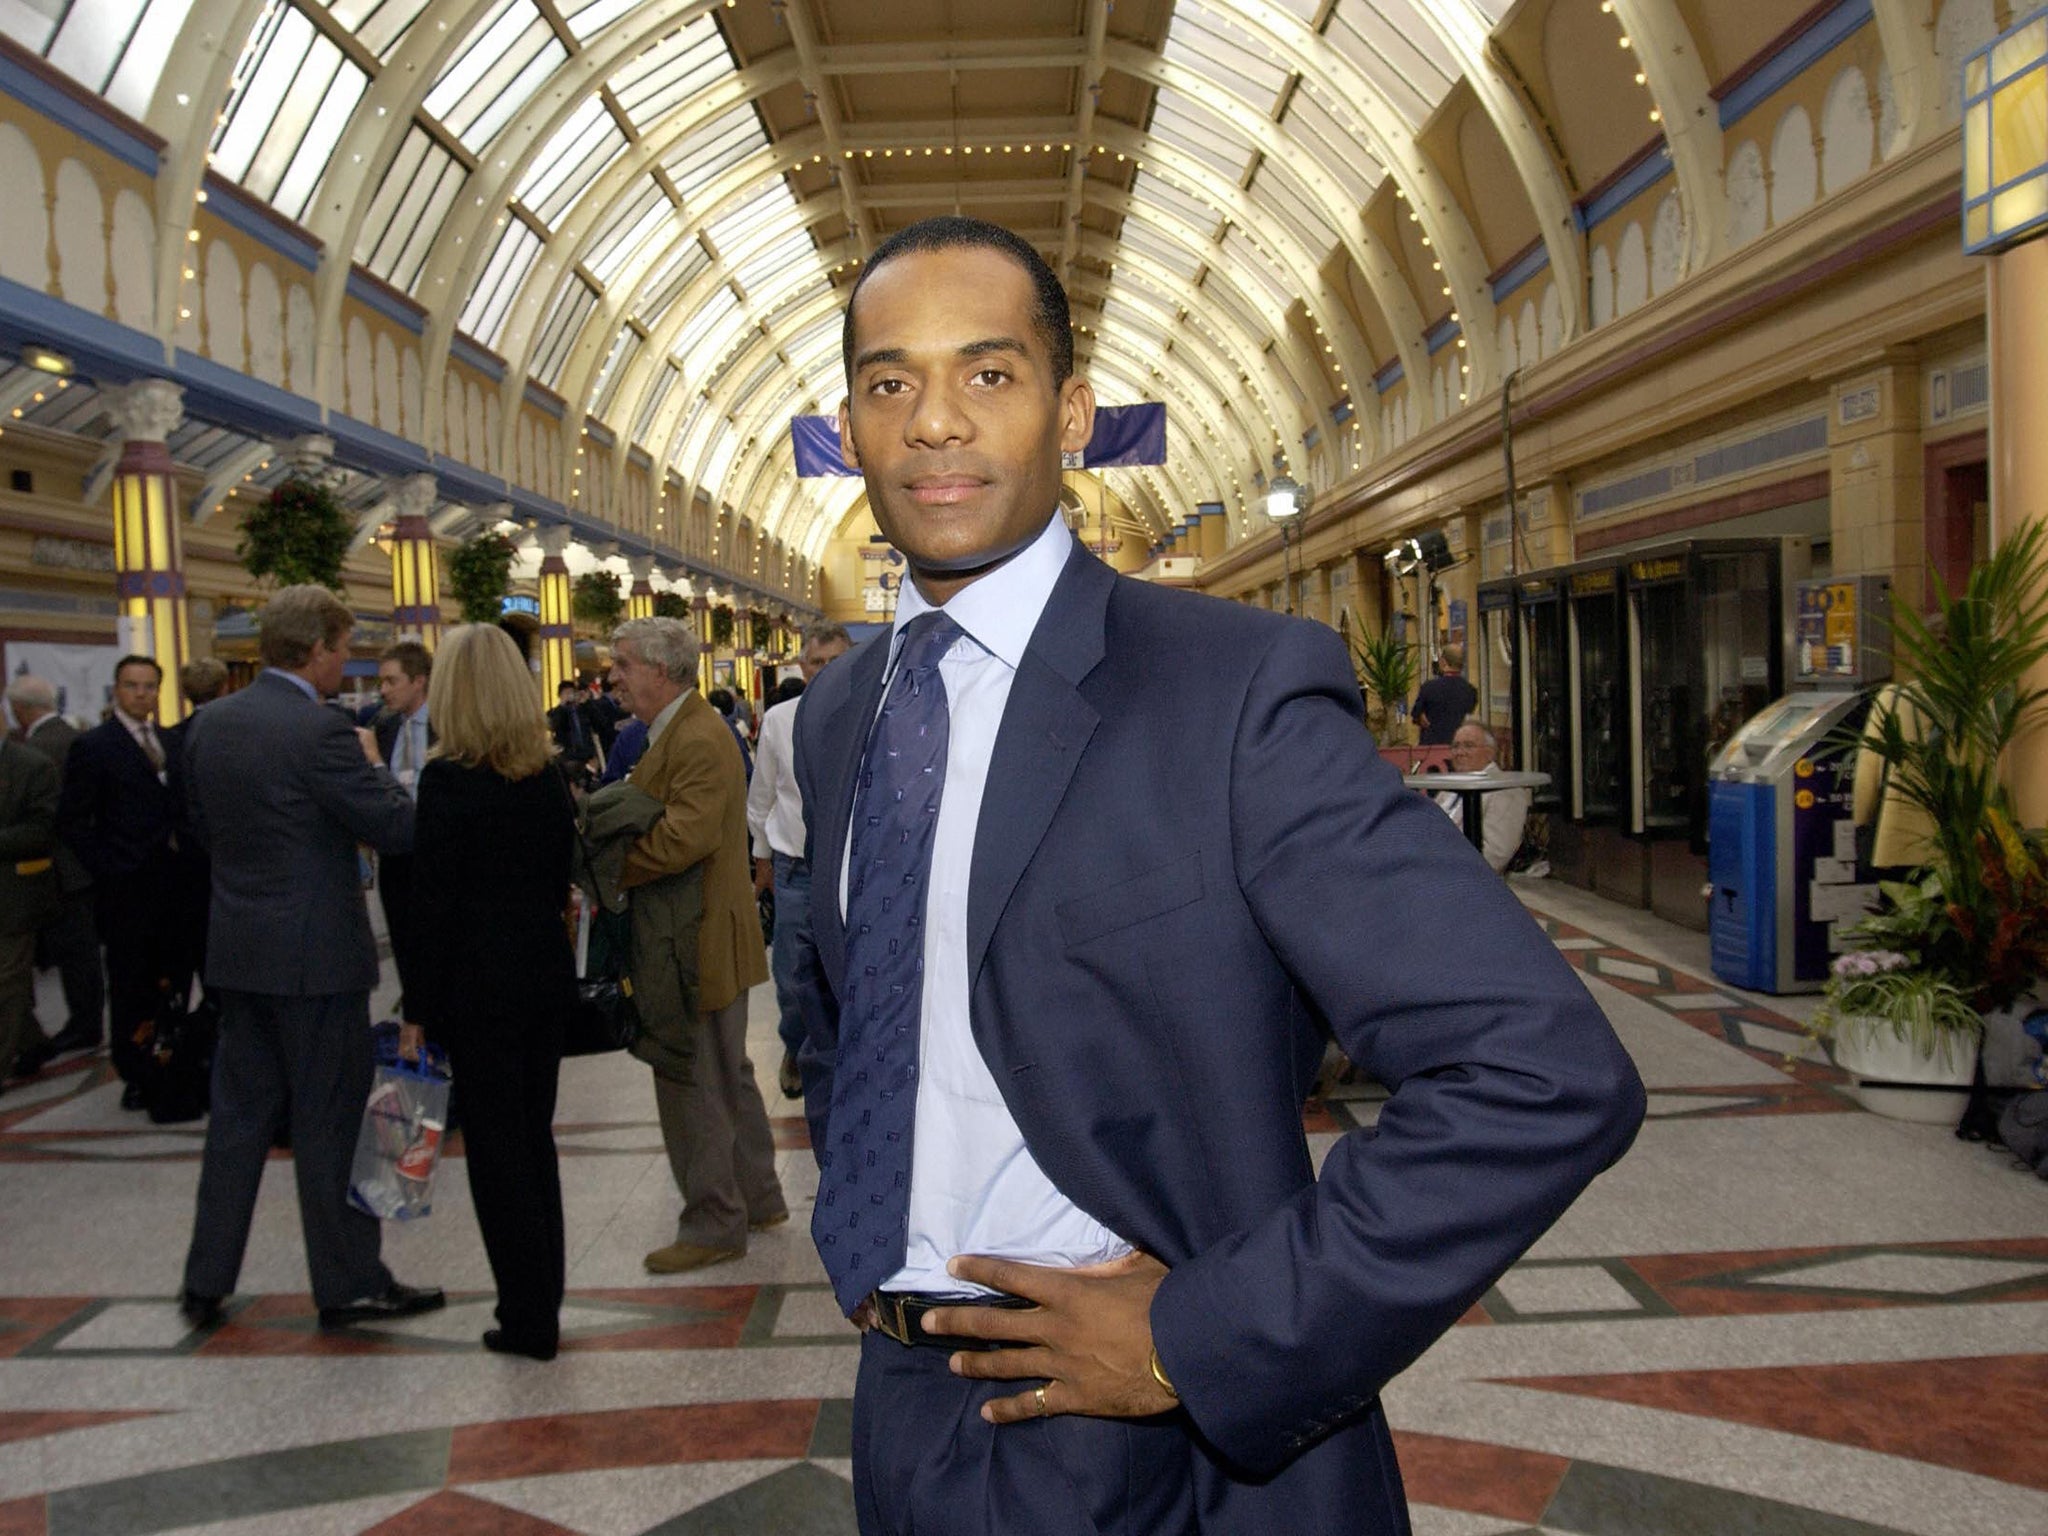 Adam Afriyie complained at the MPs' salaray of £67,000